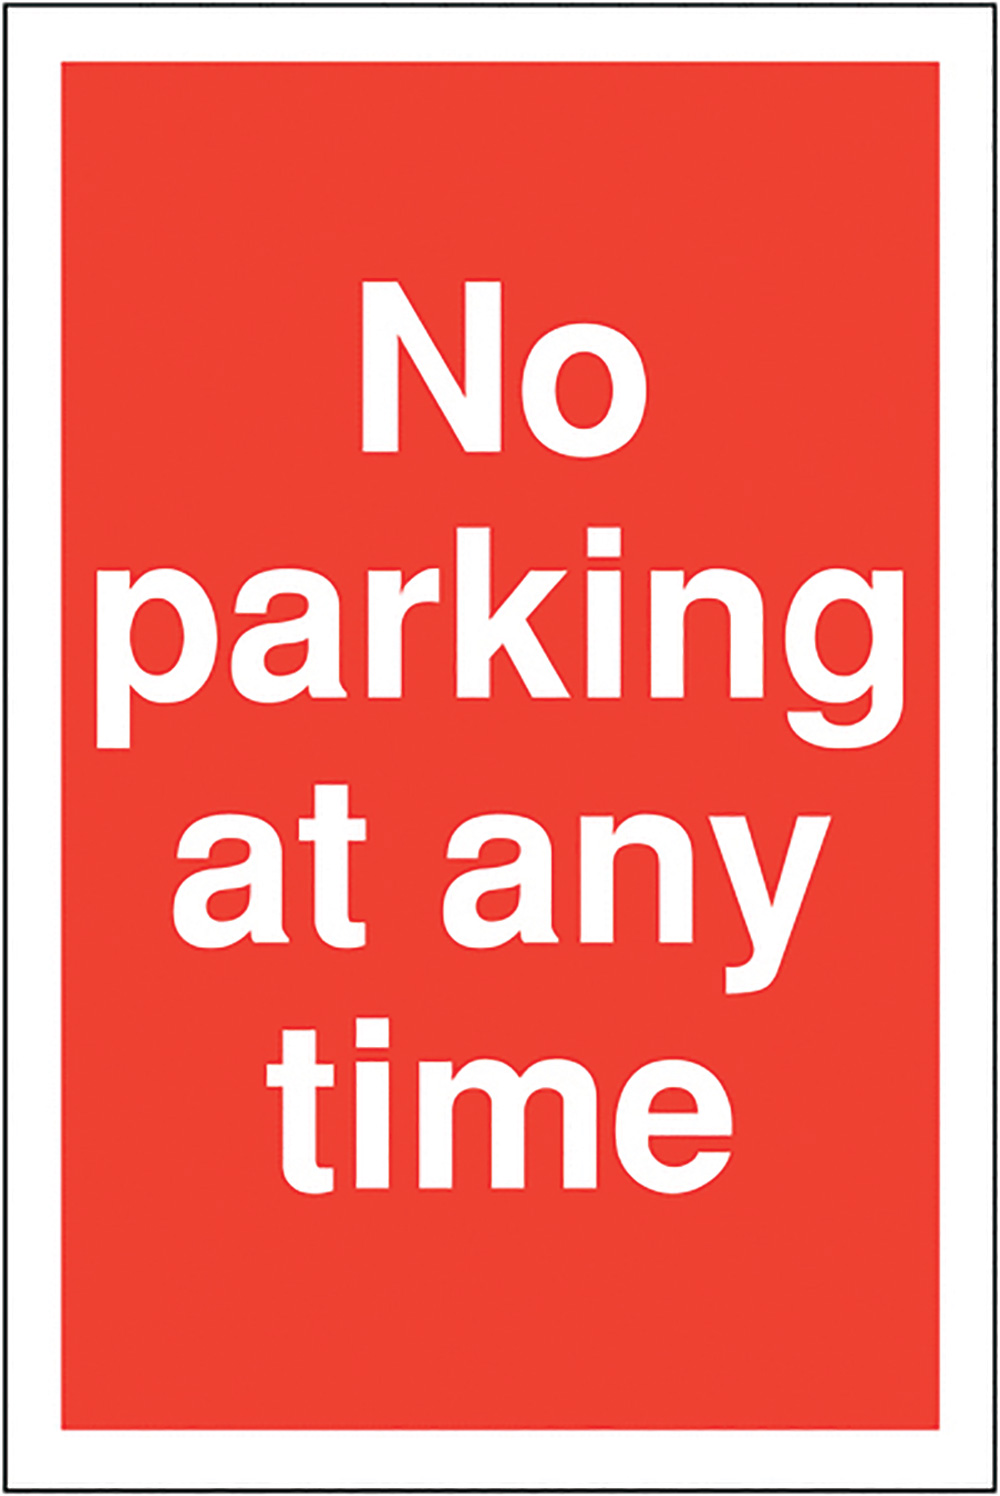 No parking at anytime 400 x 300mm 2mm Polycarbonate Safety Sign  